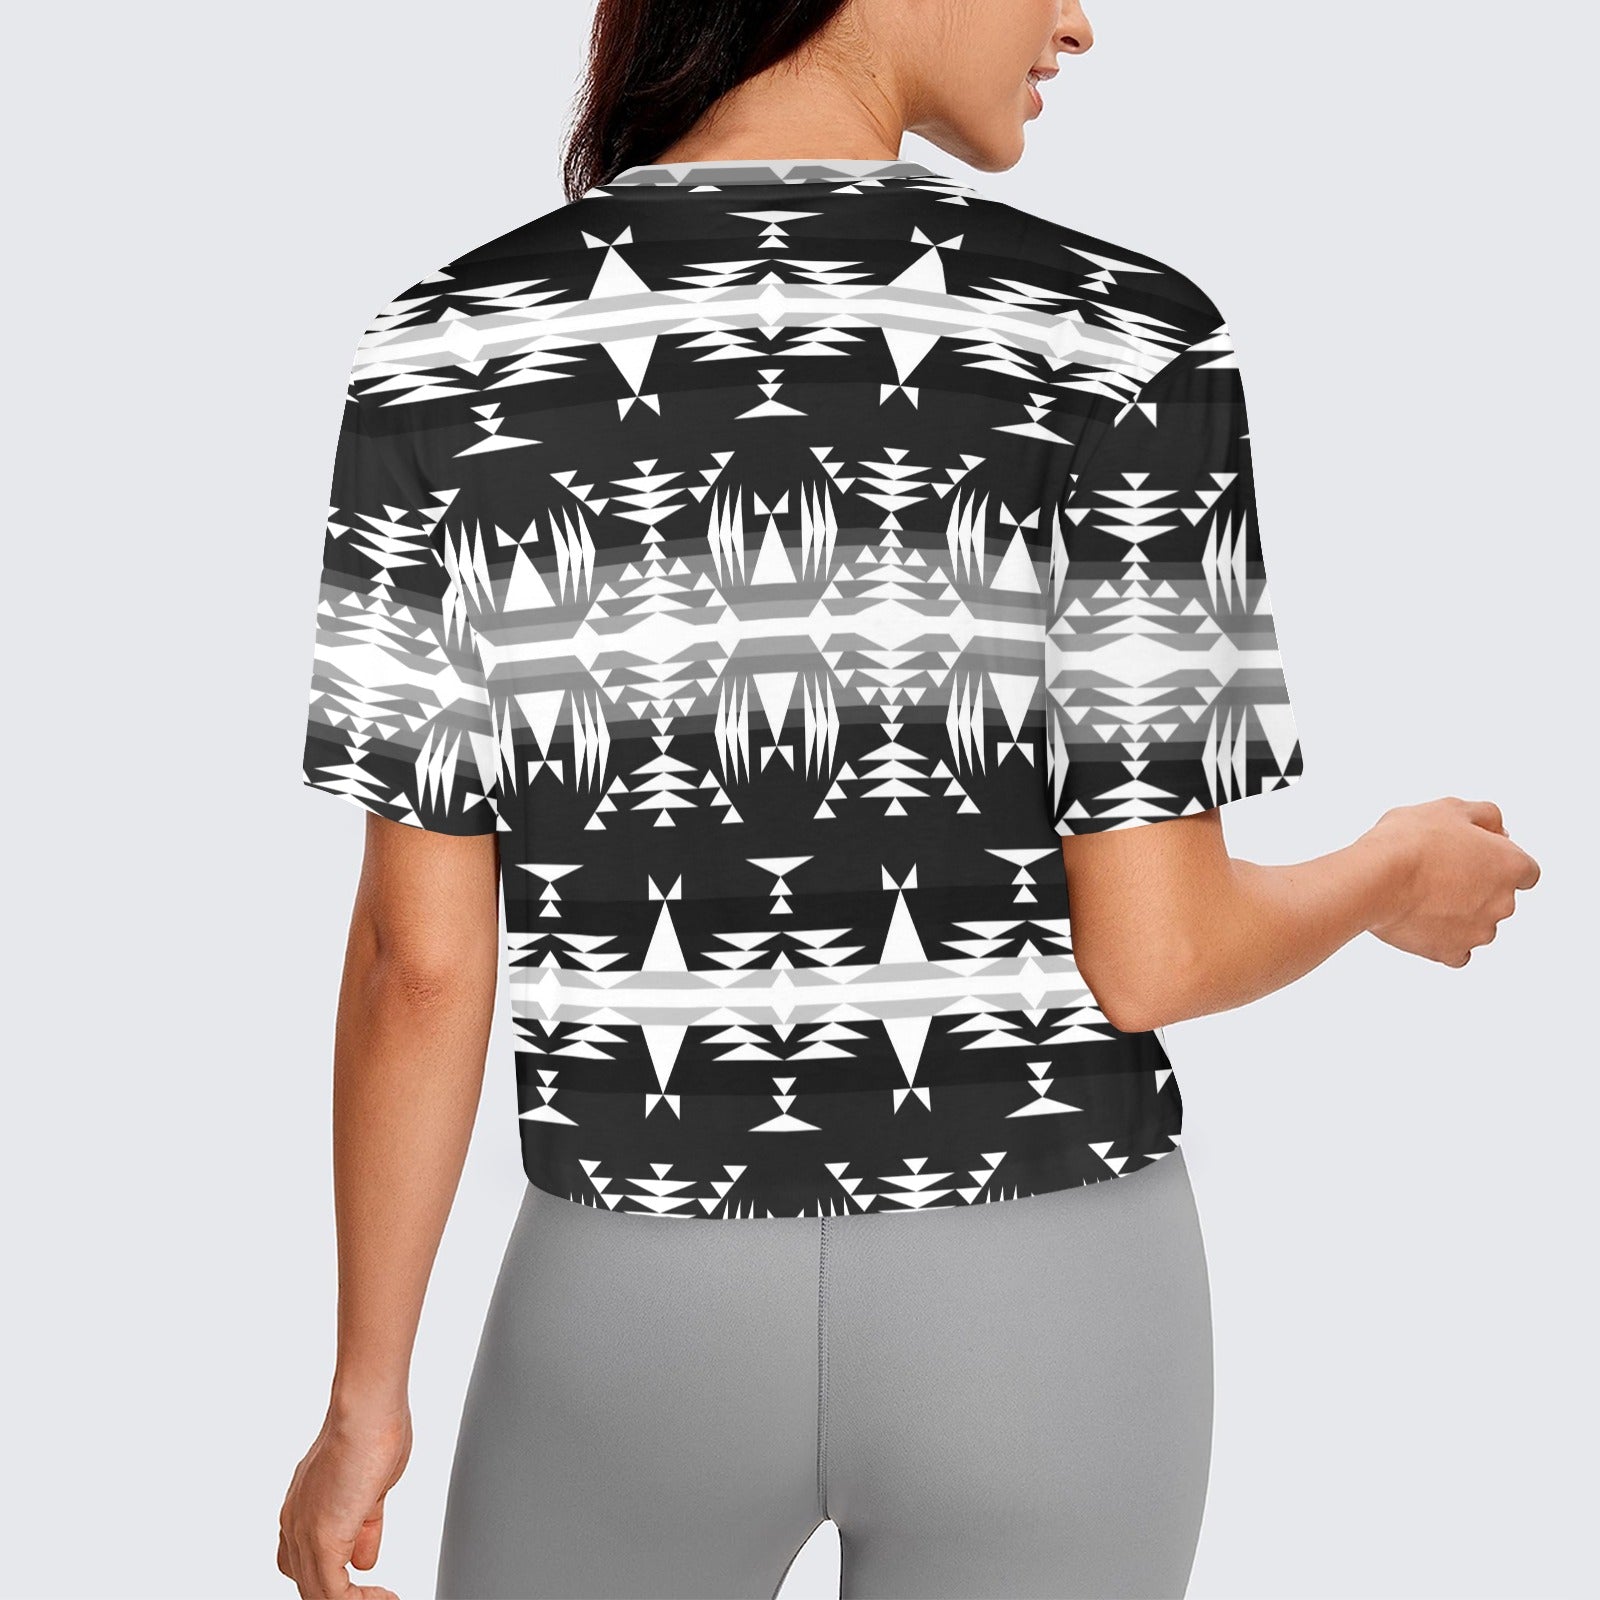 Between the Mountains Black and White Women's Cropped T-shirt